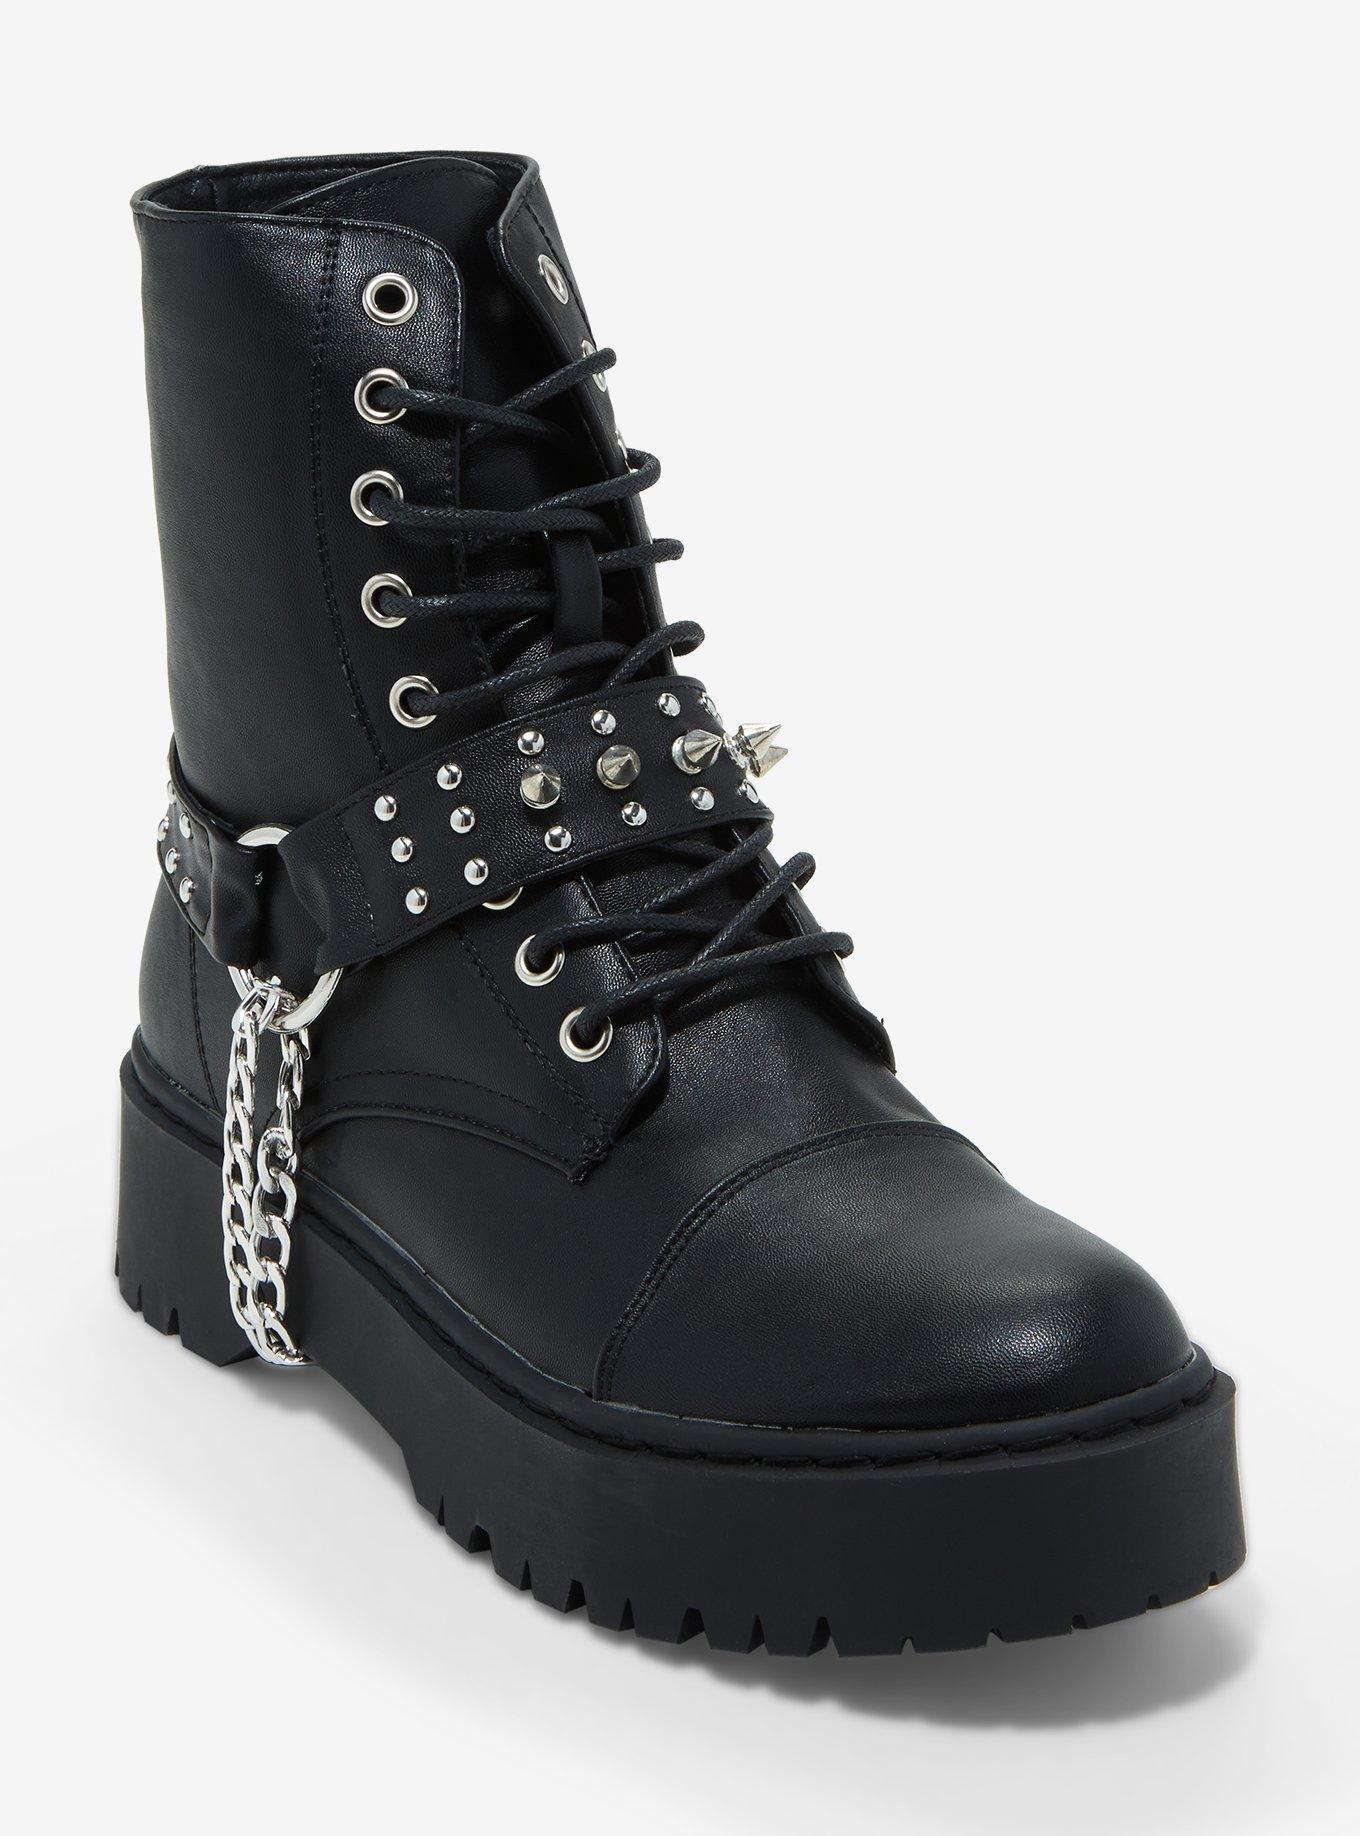 Black Spike & Chain Combat Boots | Hot Topic